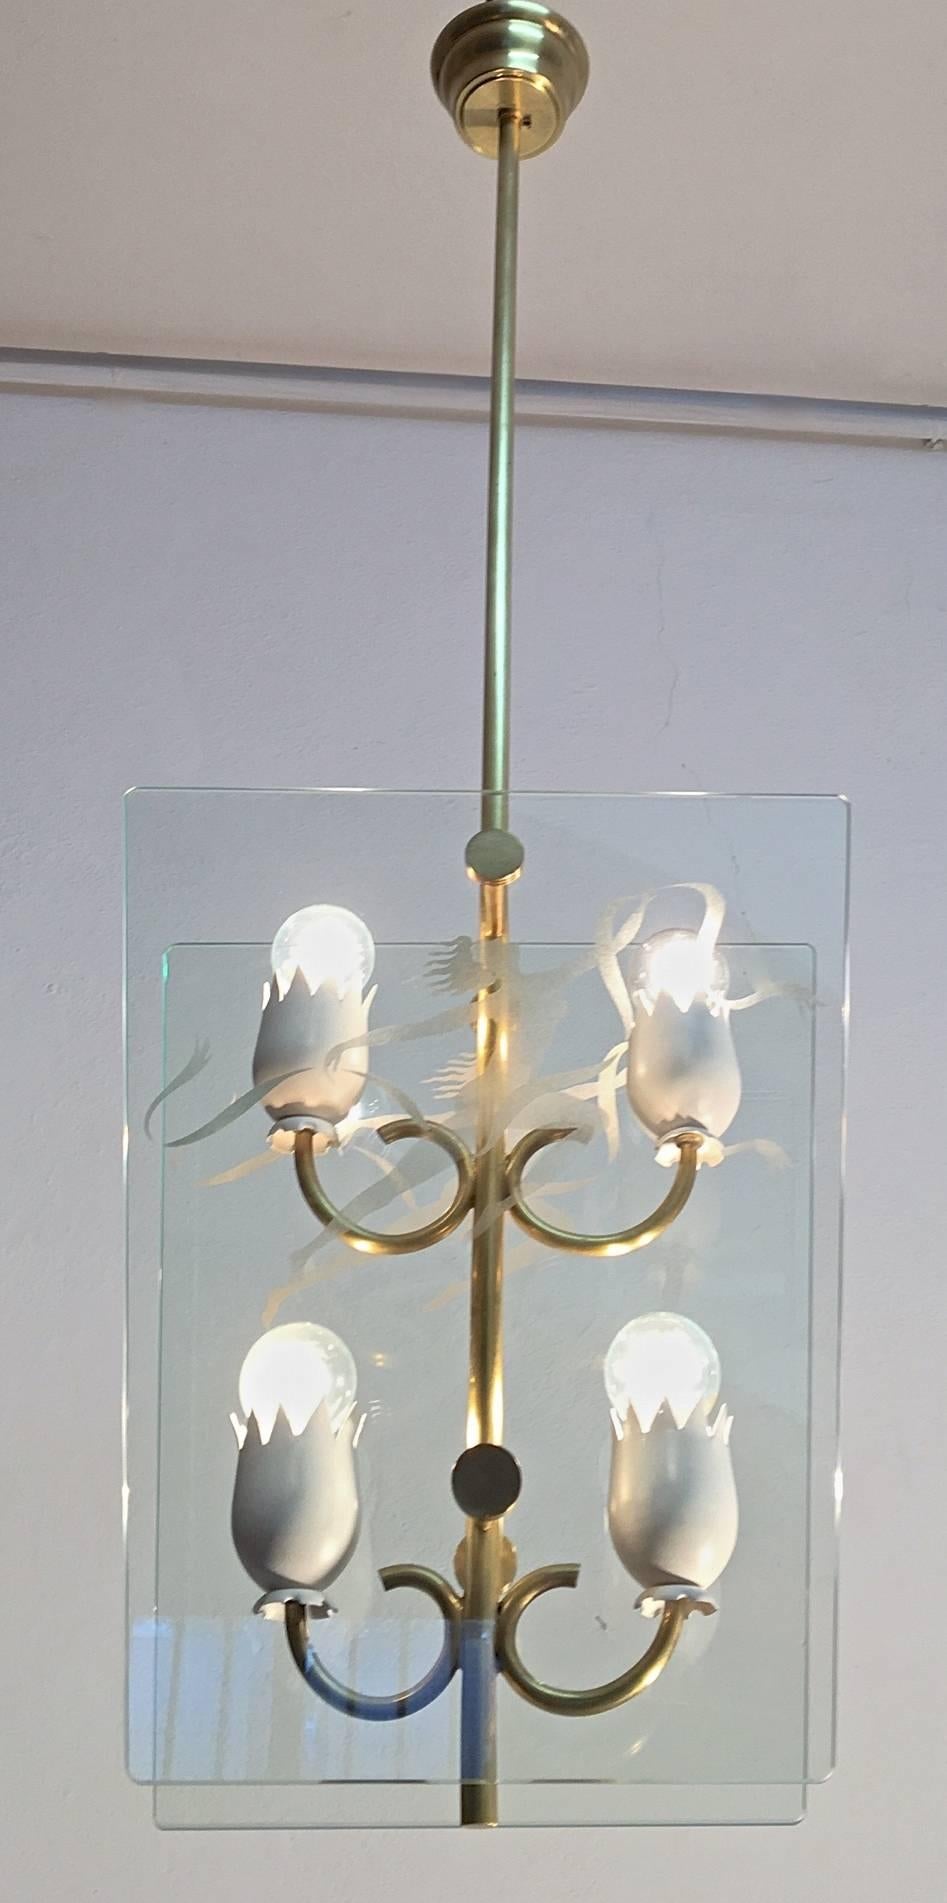 A Mid-Century, Italian pendant in glass and brass with an etched dancing figure. (vetro sabbiato).
Four lights with white metal flower shaped holders and elegant curves.
 